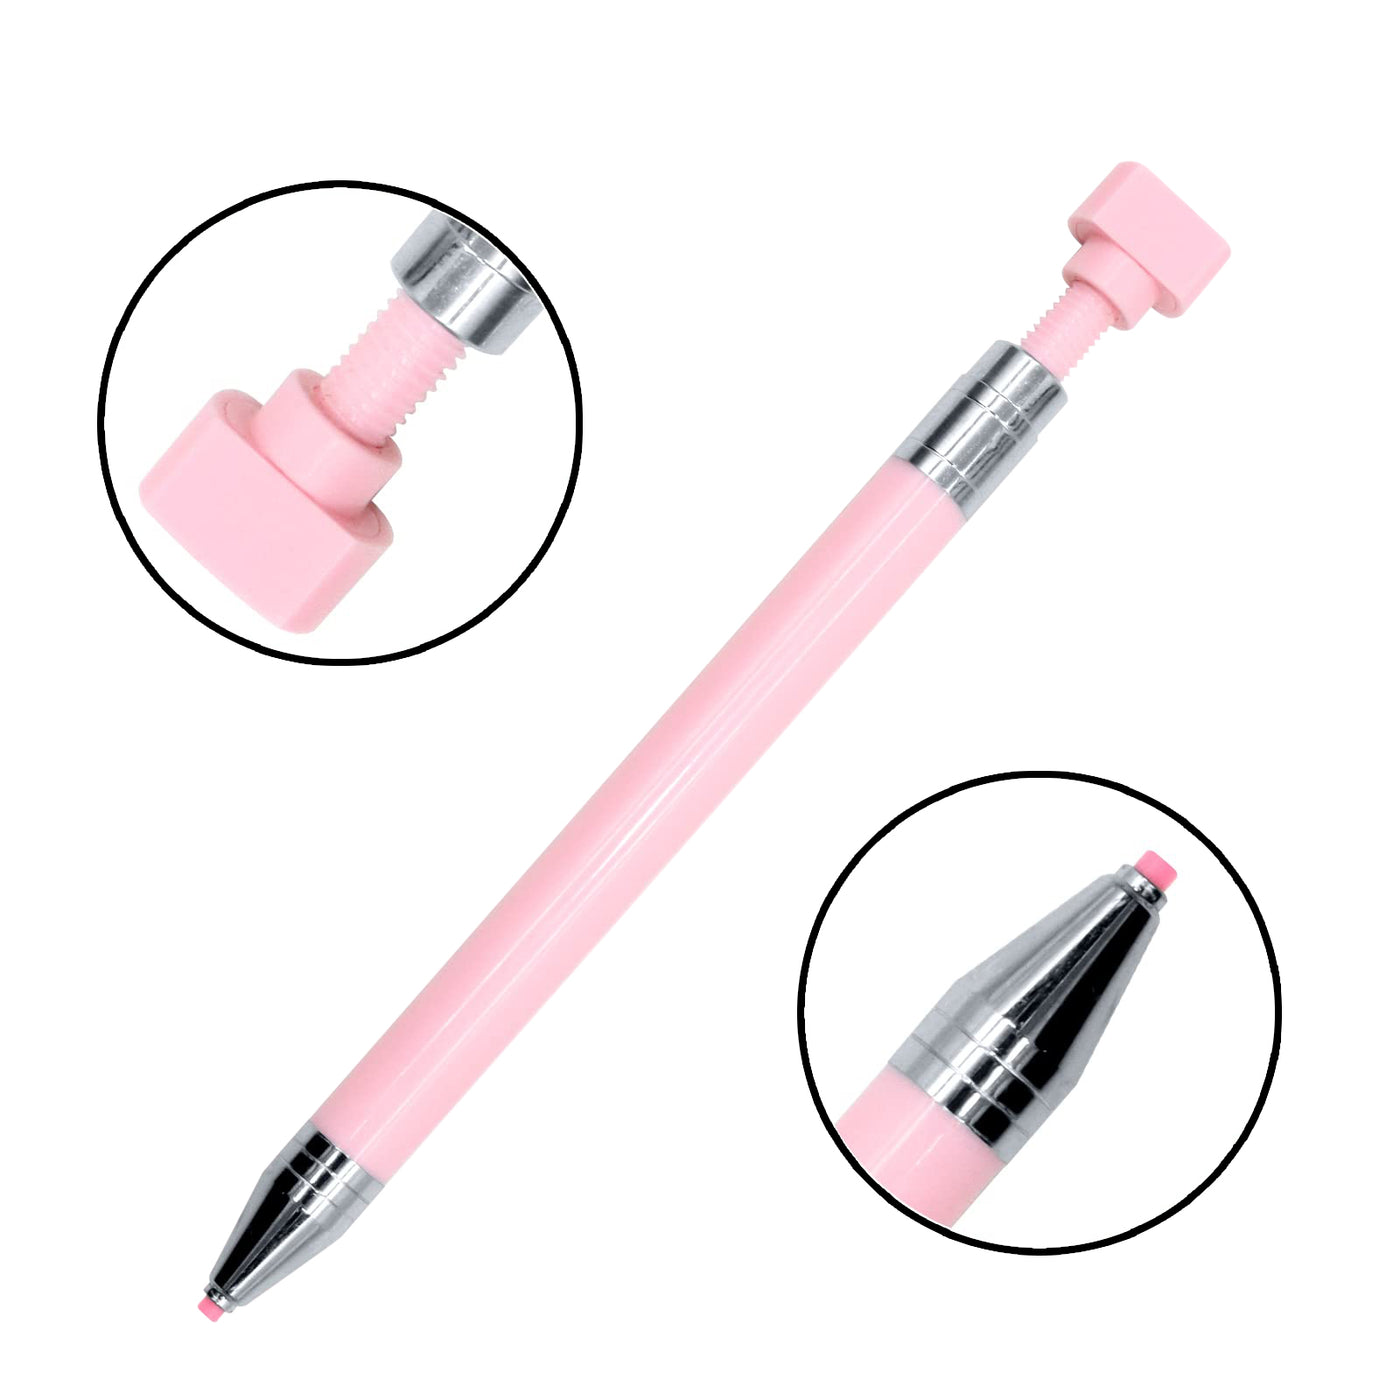 2pcs Refillable Diamond Painting Wax Pen with Case – Home Craftology